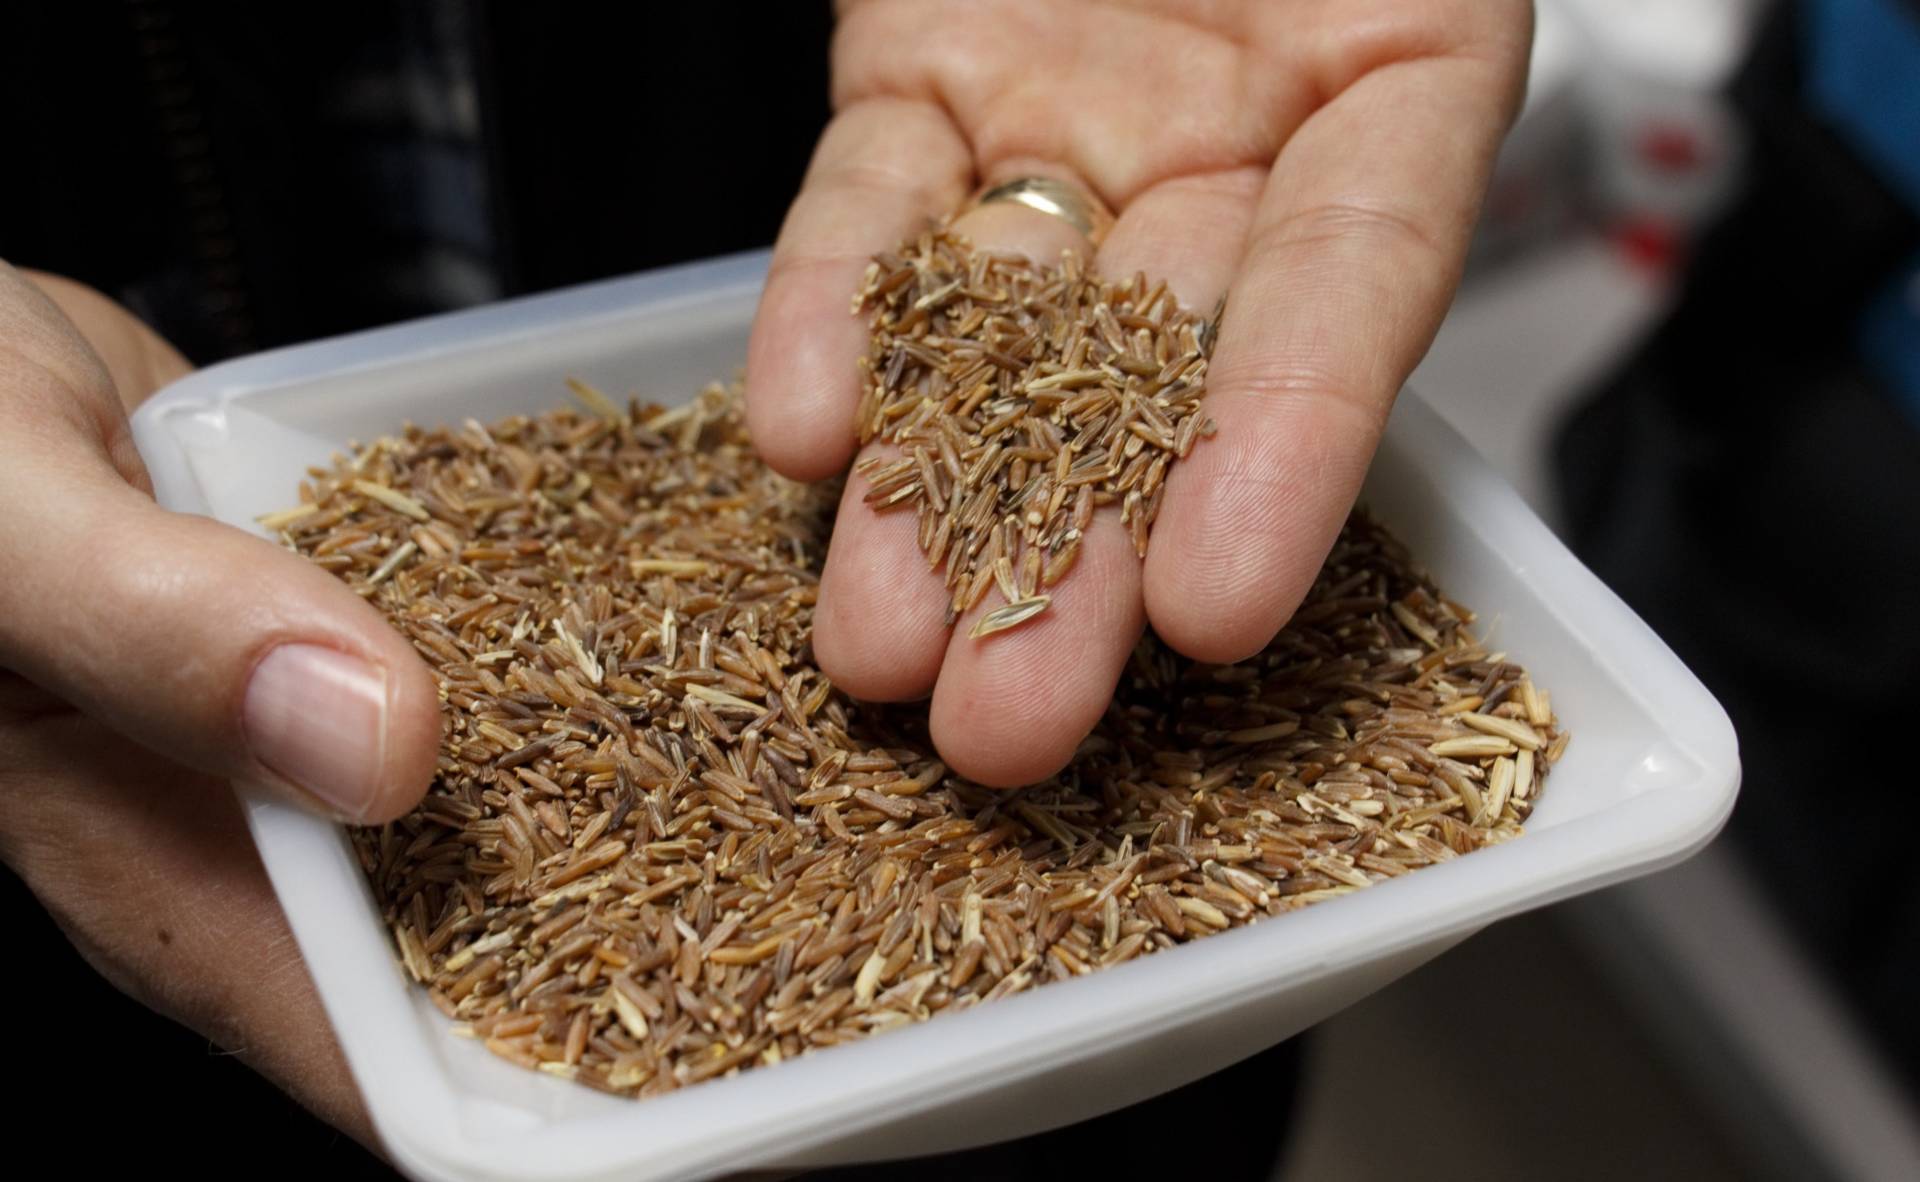 Grain from intermediate wheatgrass, or Kernza. The Land Institute is recruiting farmers to grow larger quantities of the grain for General Mills.